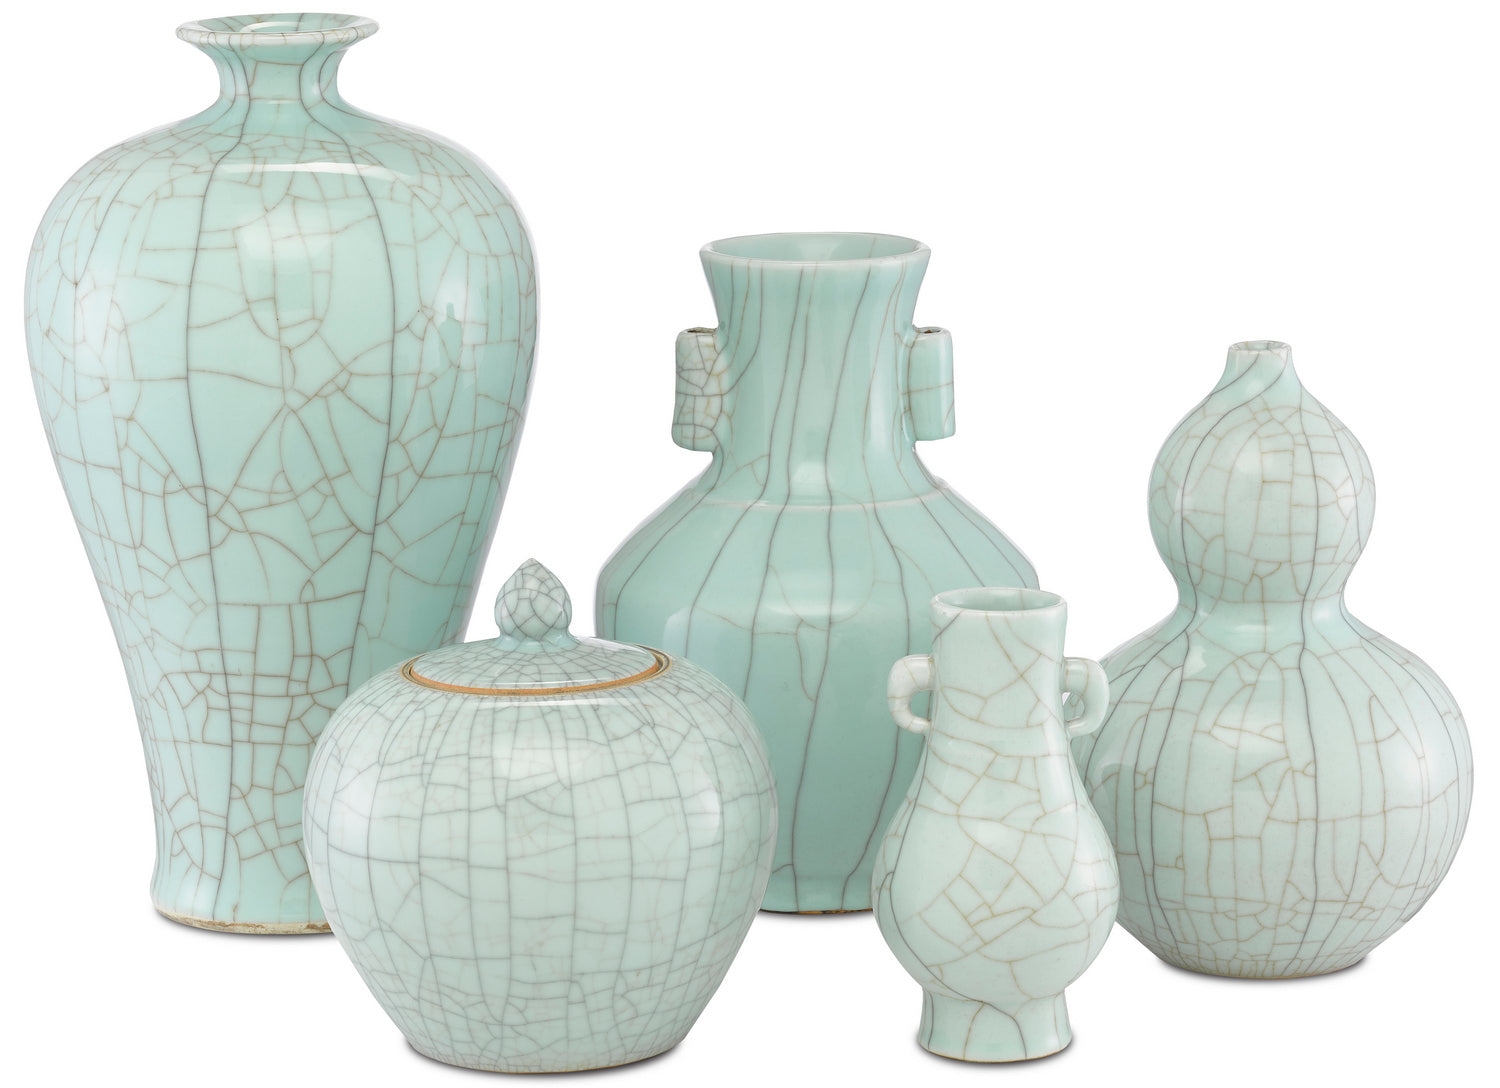 Vase from the Maiping collection in Celadon Crackle finish